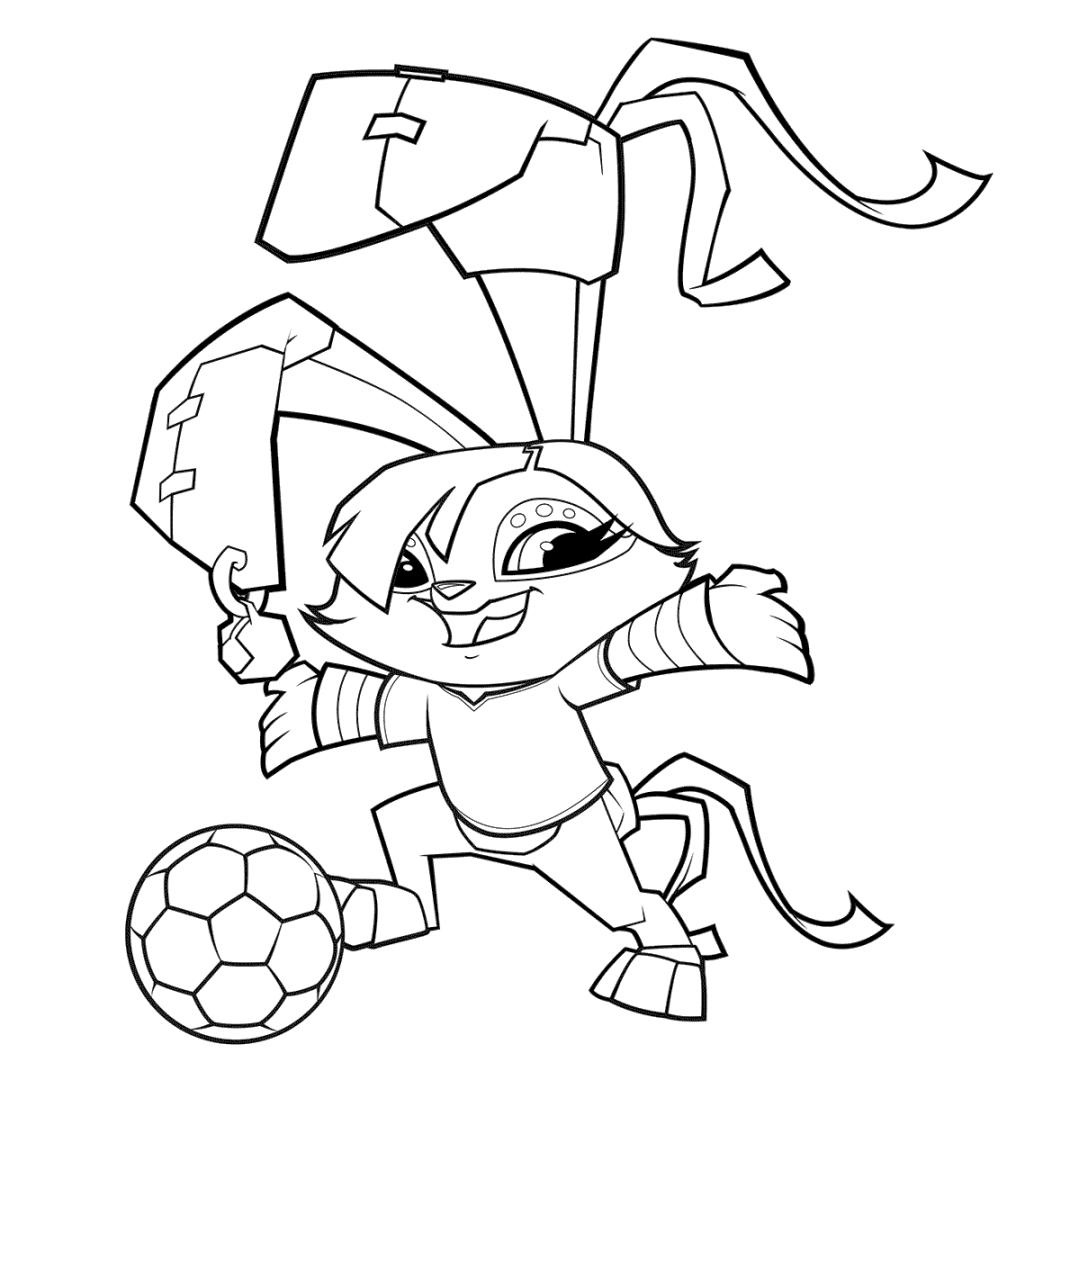 Animal Jam Coloring Pages Printable Pdf - Soccer Bunny Animal Jam Coloring Pages Free